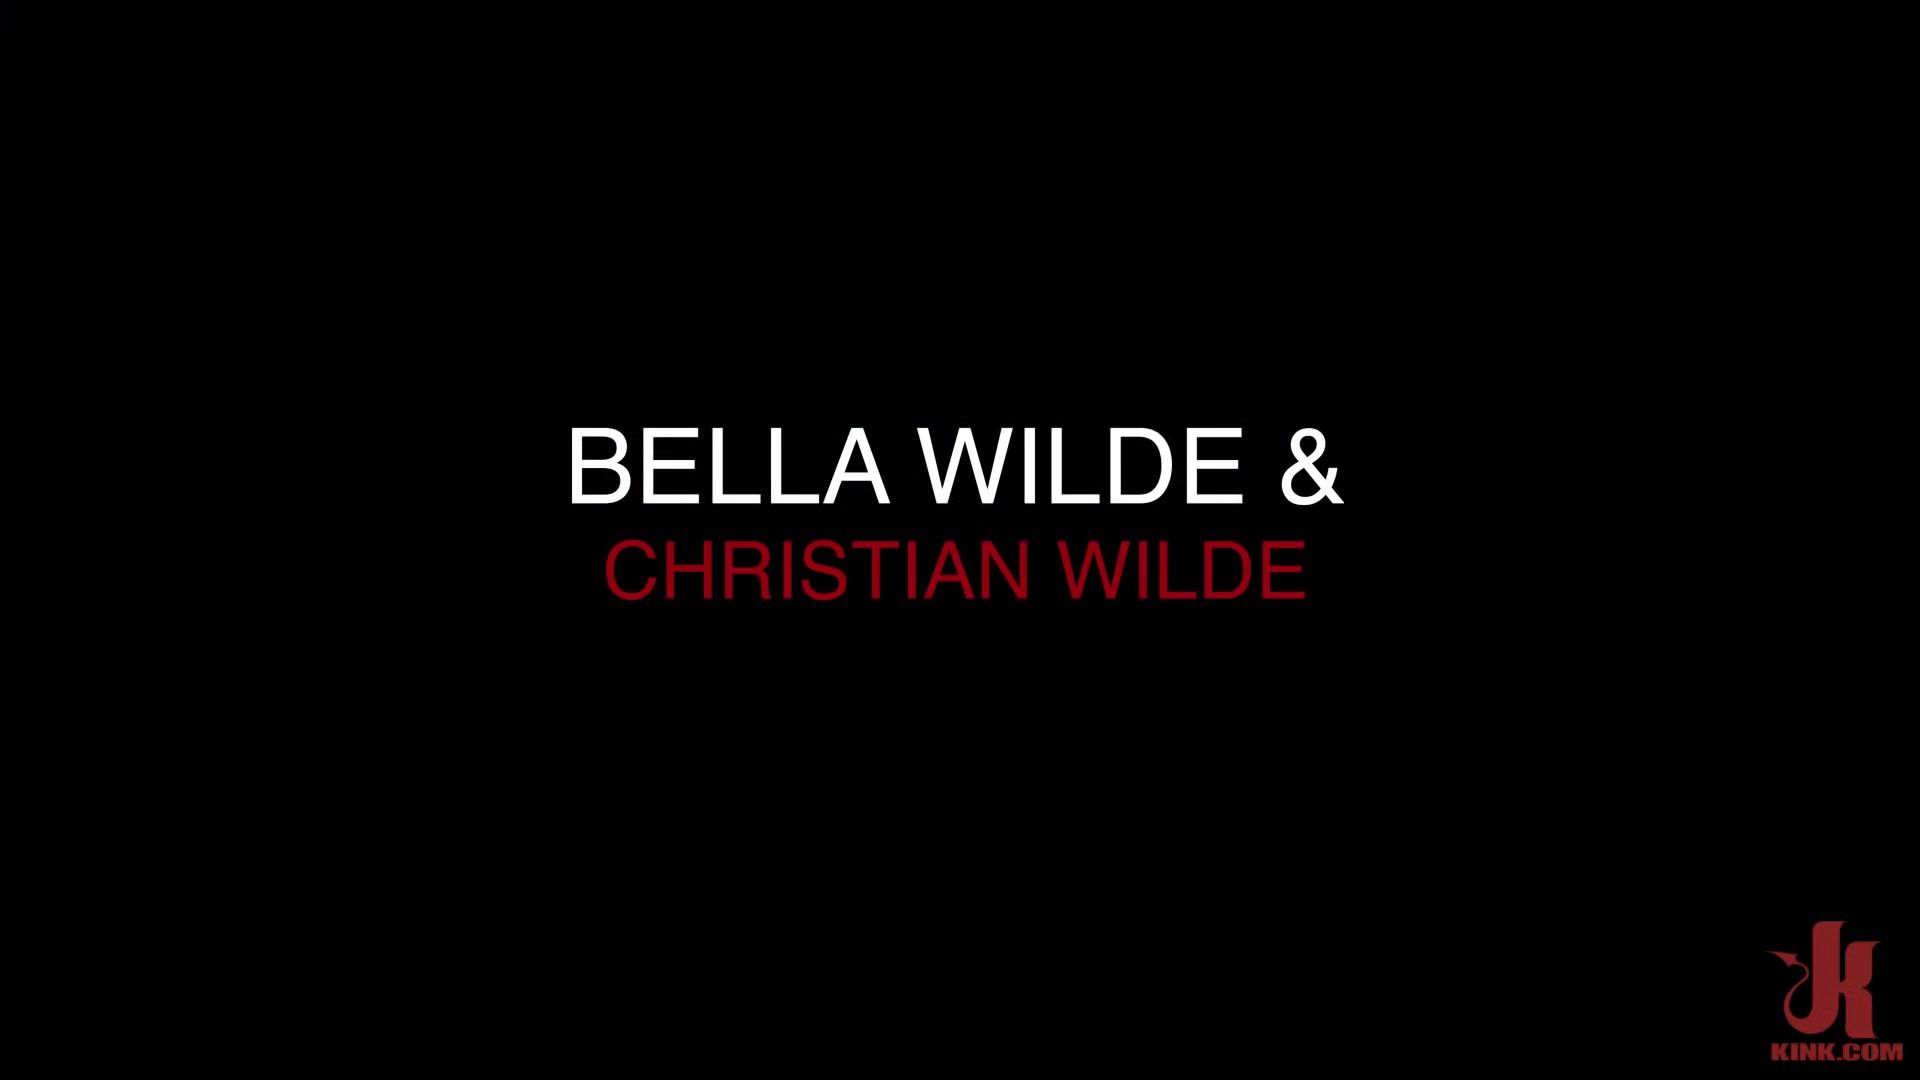 Pale Christian Wilde And Bella Wilde In The Wildes: The Tables Are Turned Lima